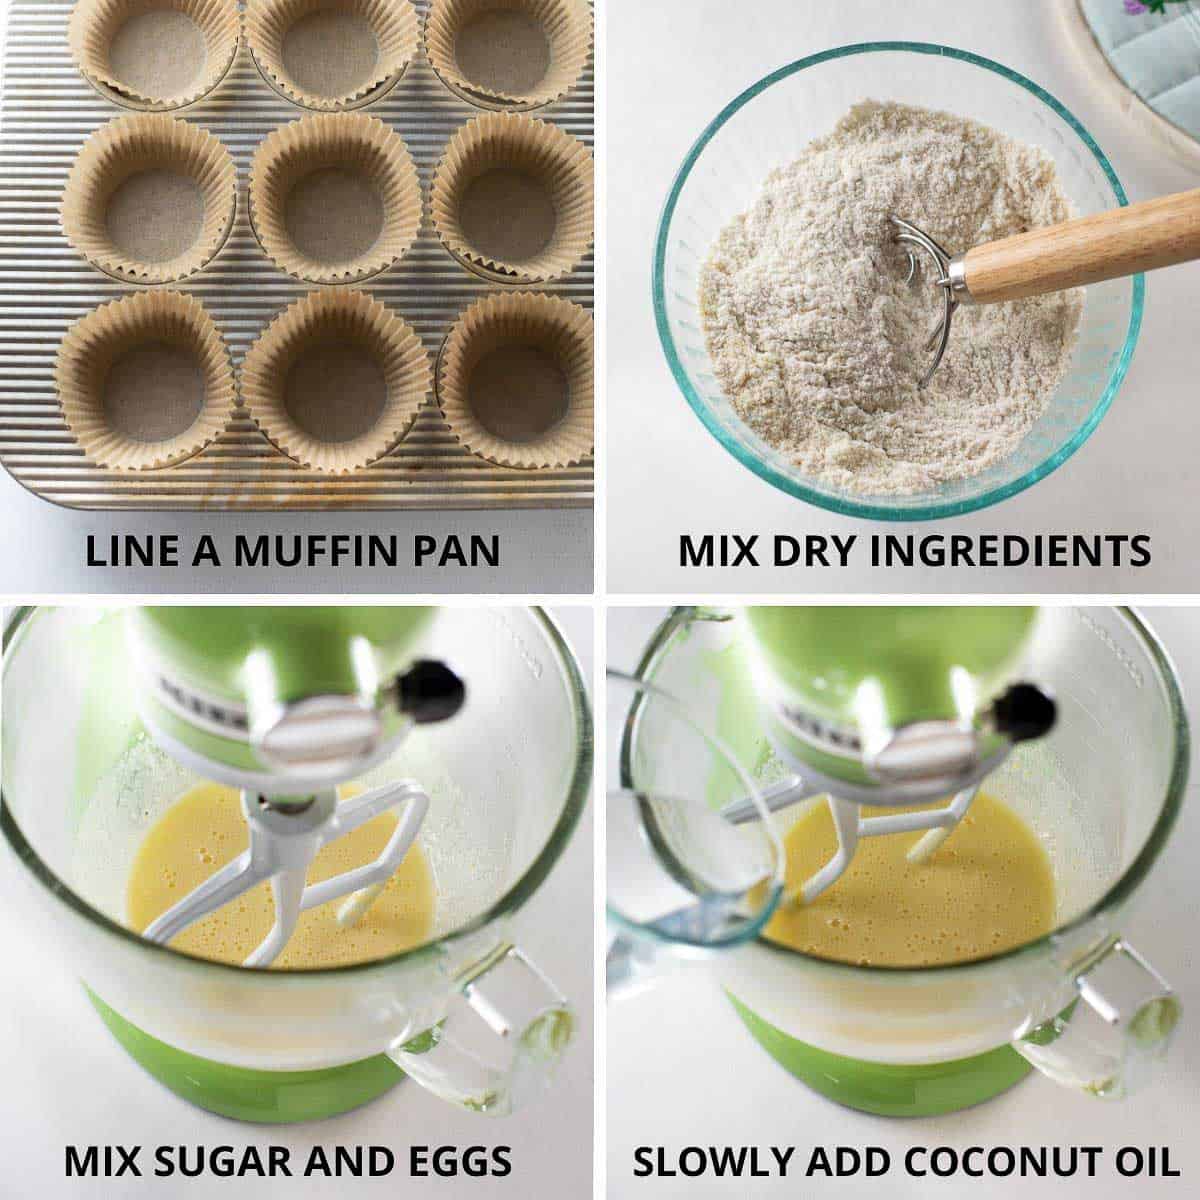 how to mix together the muffin batter in the stand mixer